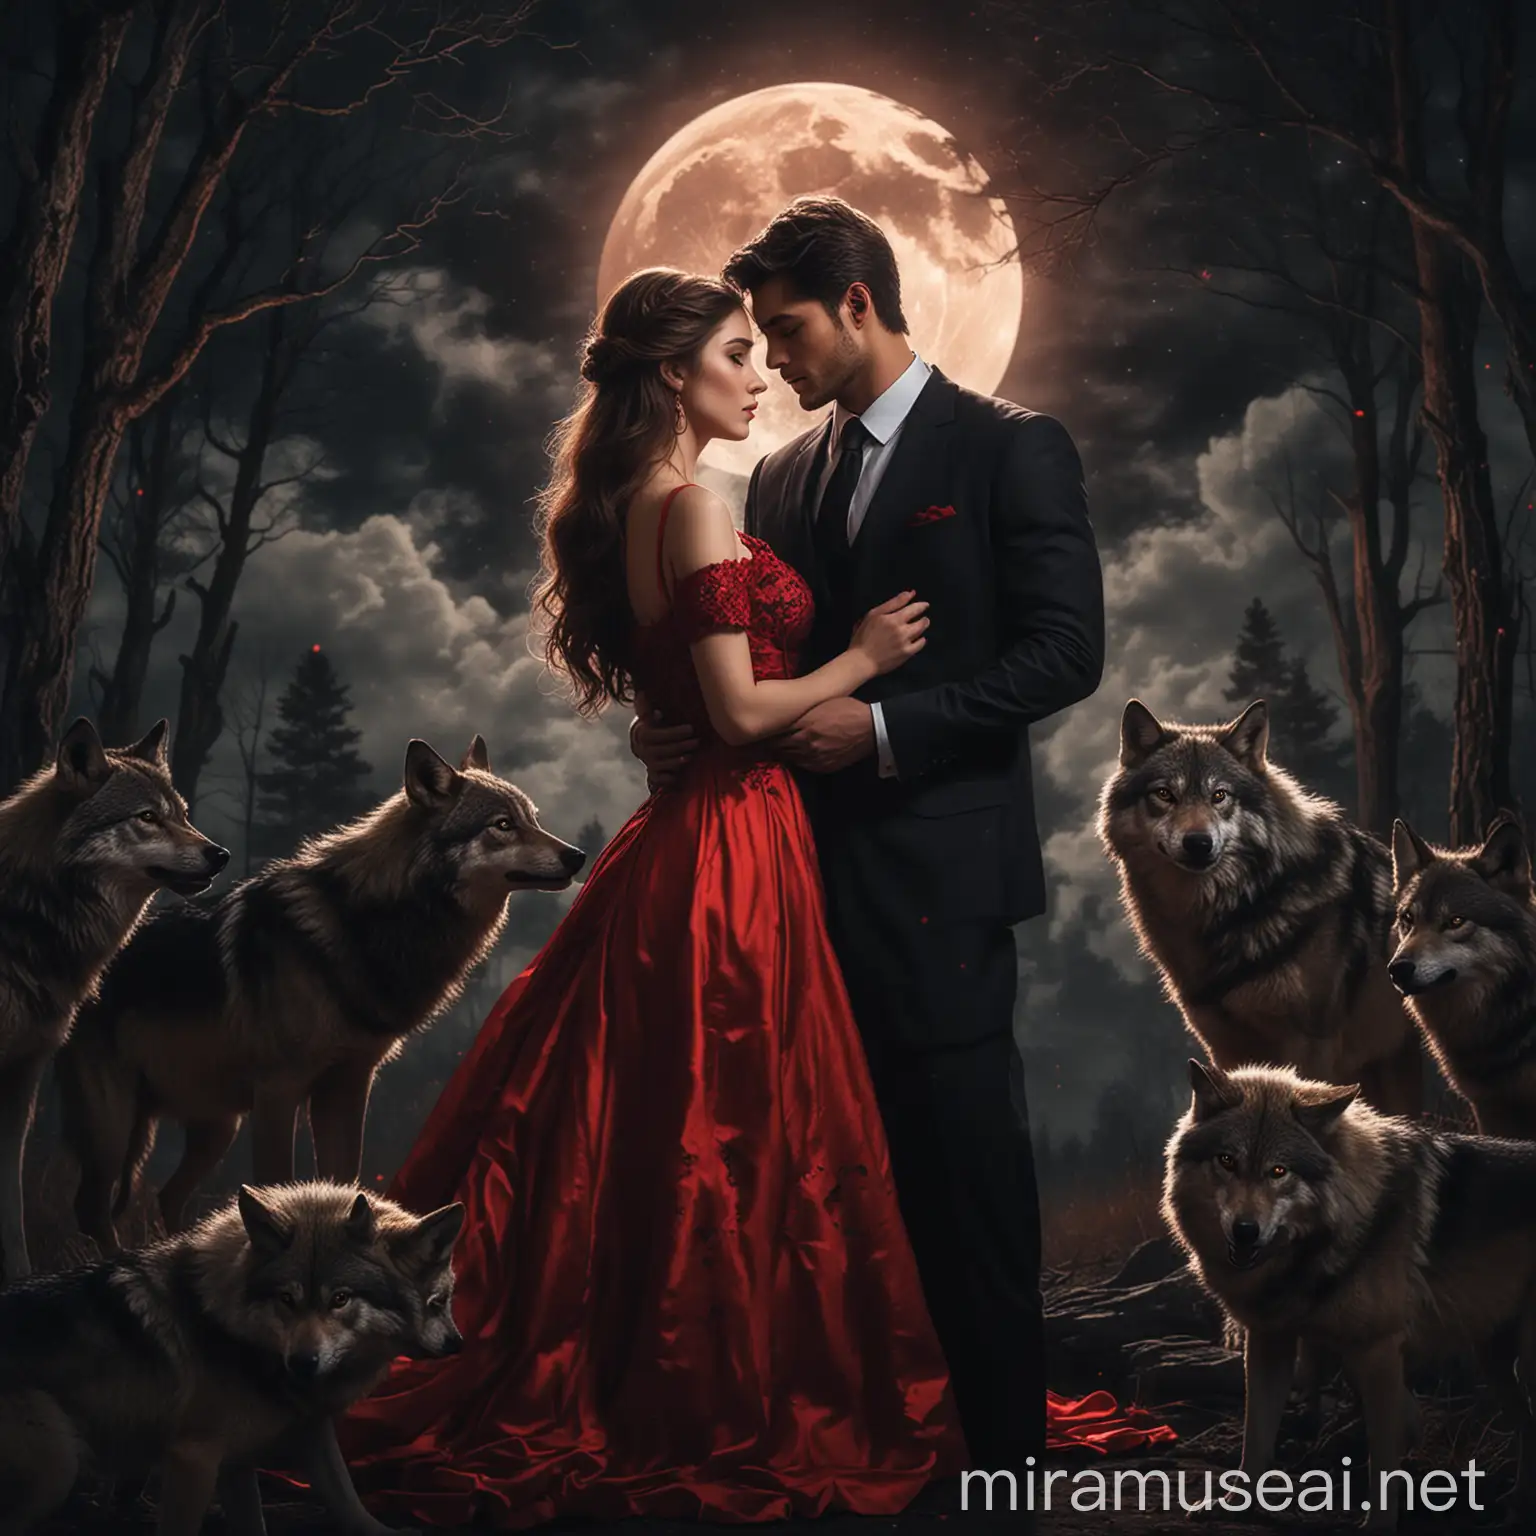 Romantic Couple with Wolves Under Glowing Moonlight